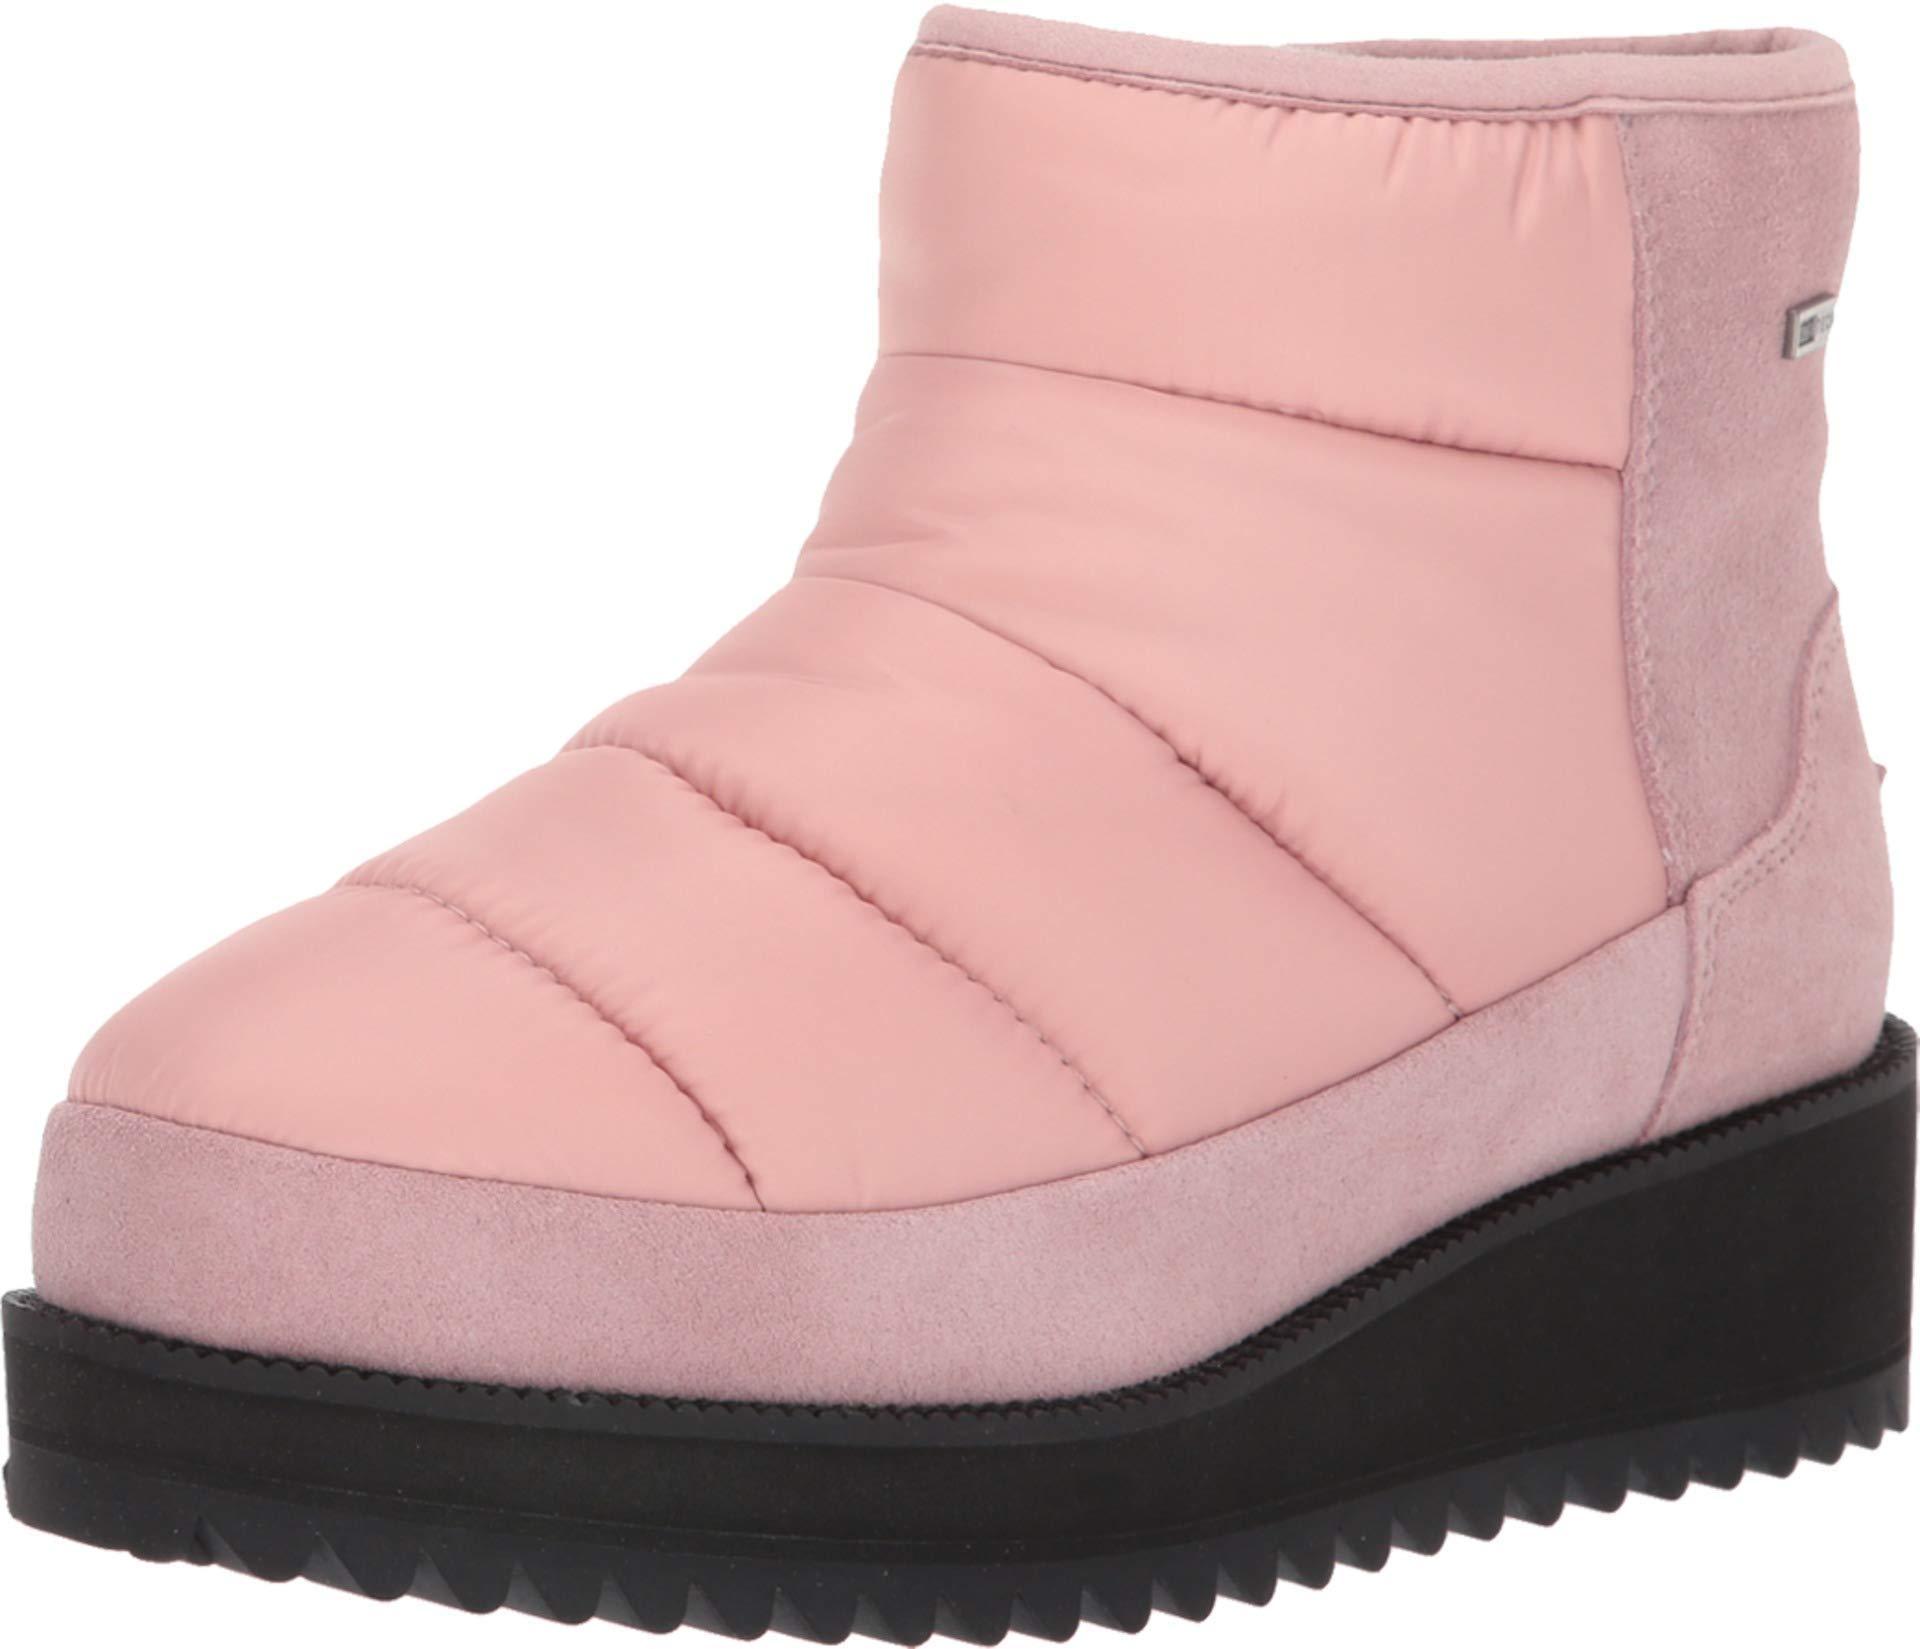 pink ugg snow boots